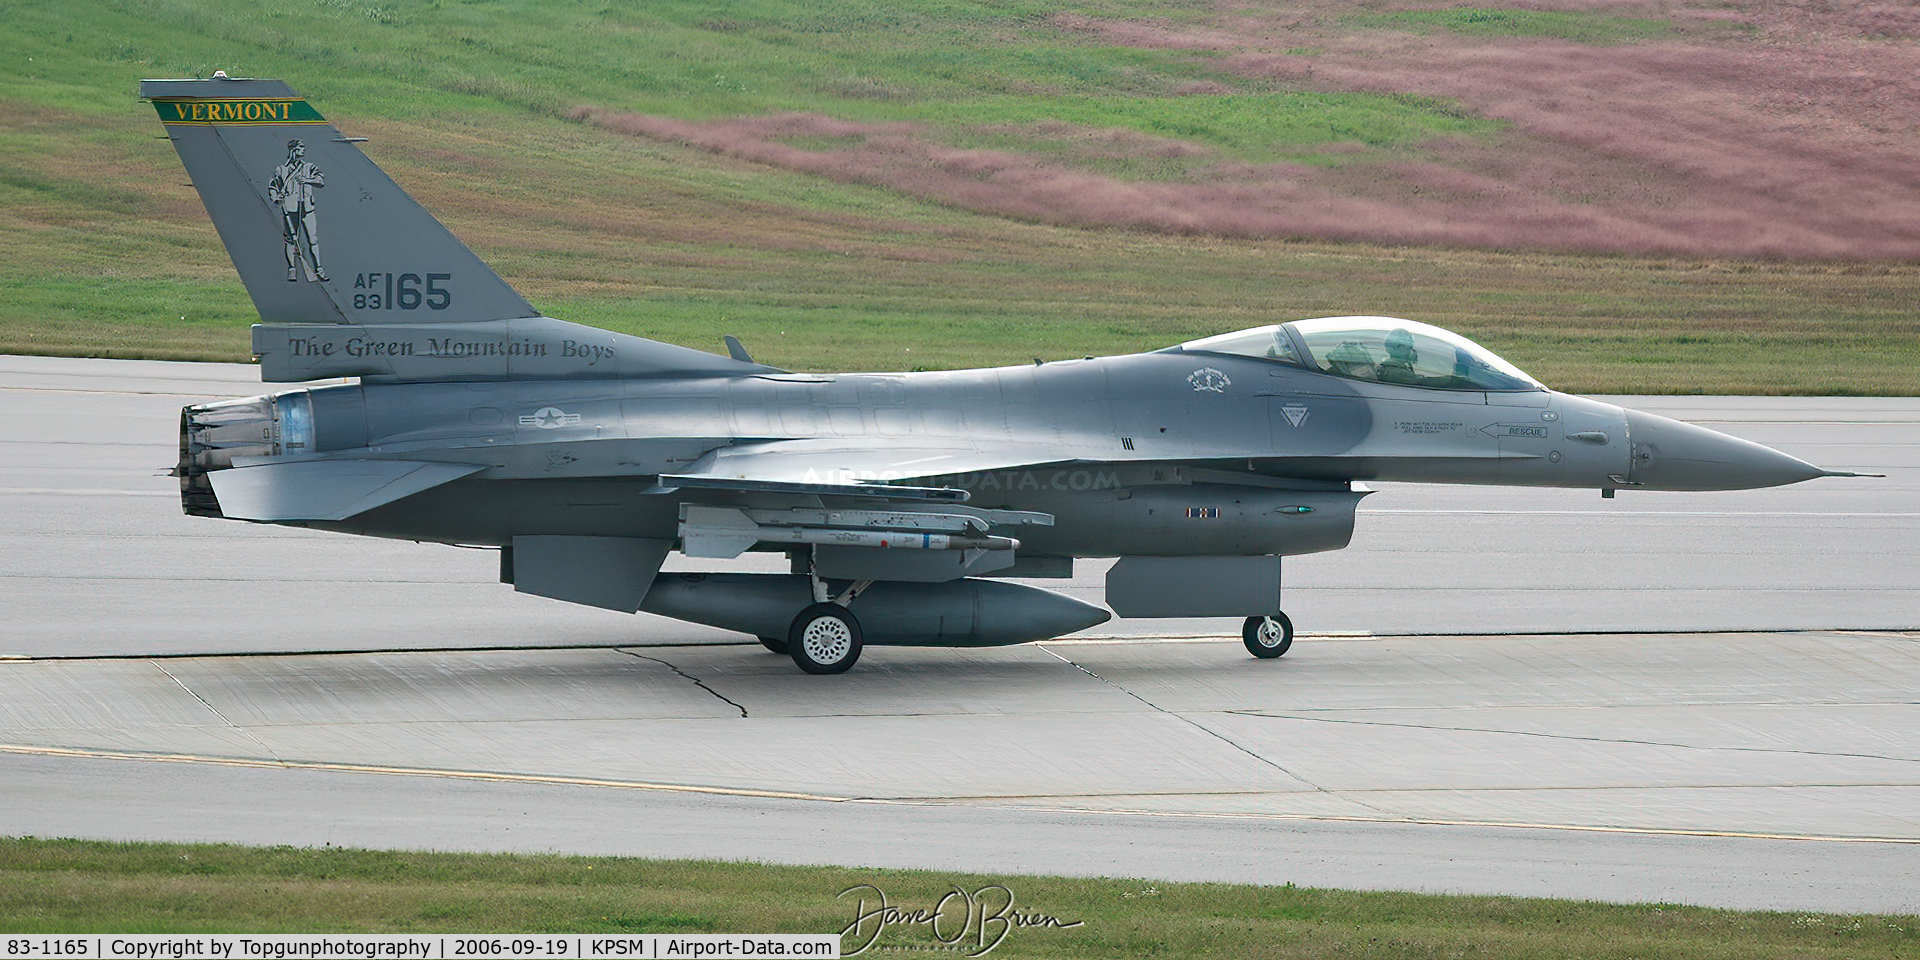 83-1165, 1983 General Dynamics F-16C Fighting Falcon C/N 5C-48, This is now the gate guard for the VT ANG